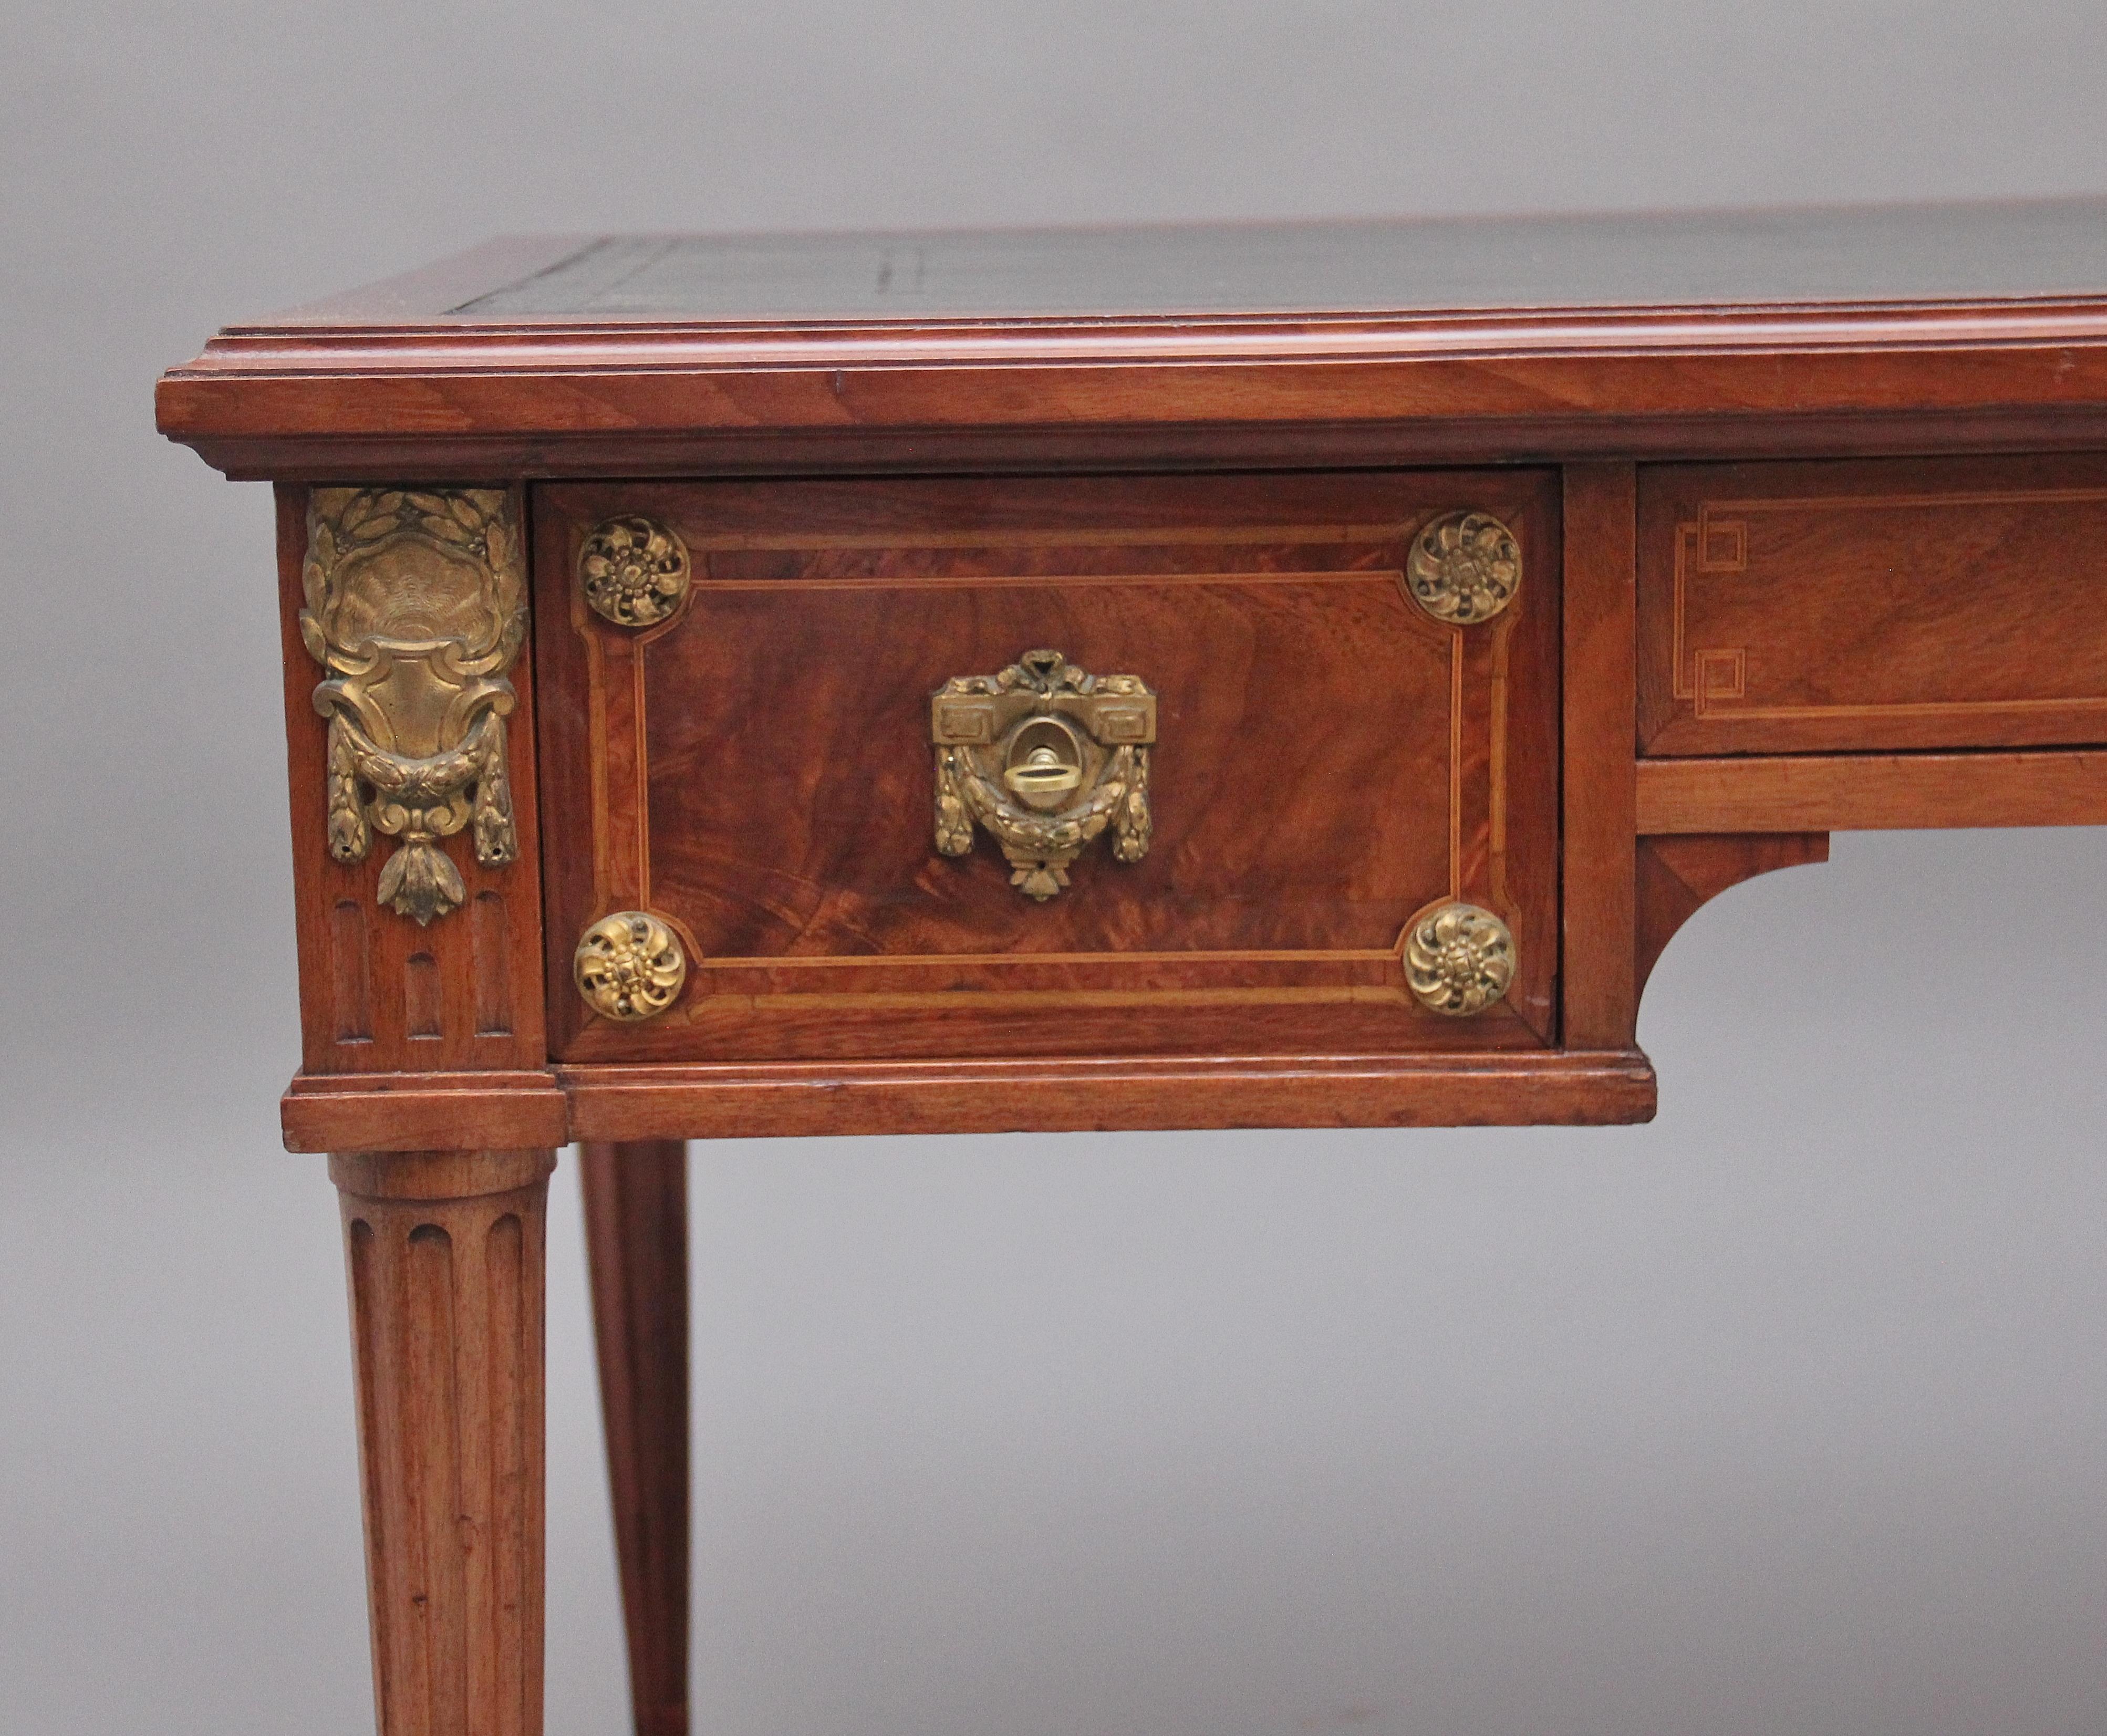 19th Century Antique French Mahogany Desk In Good Condition For Sale In Martlesham, GB